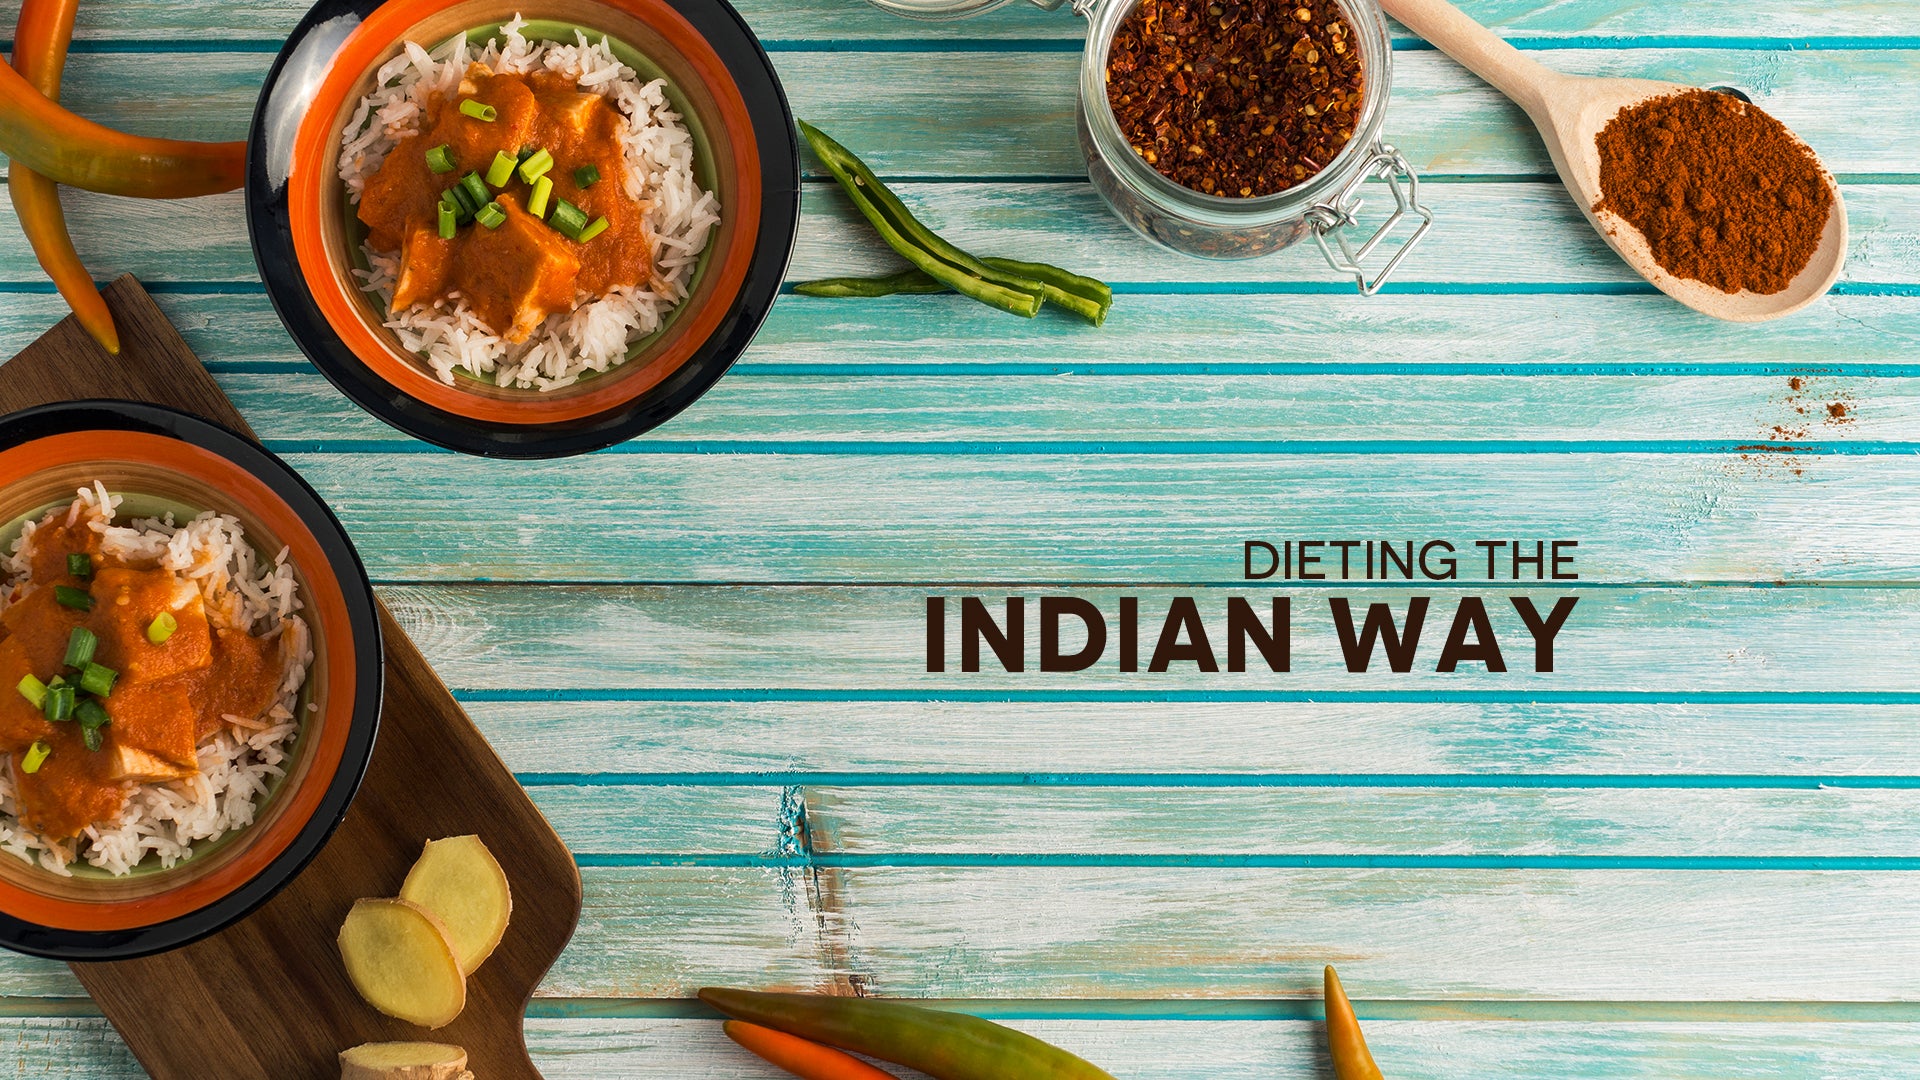 Dieting the Indian way